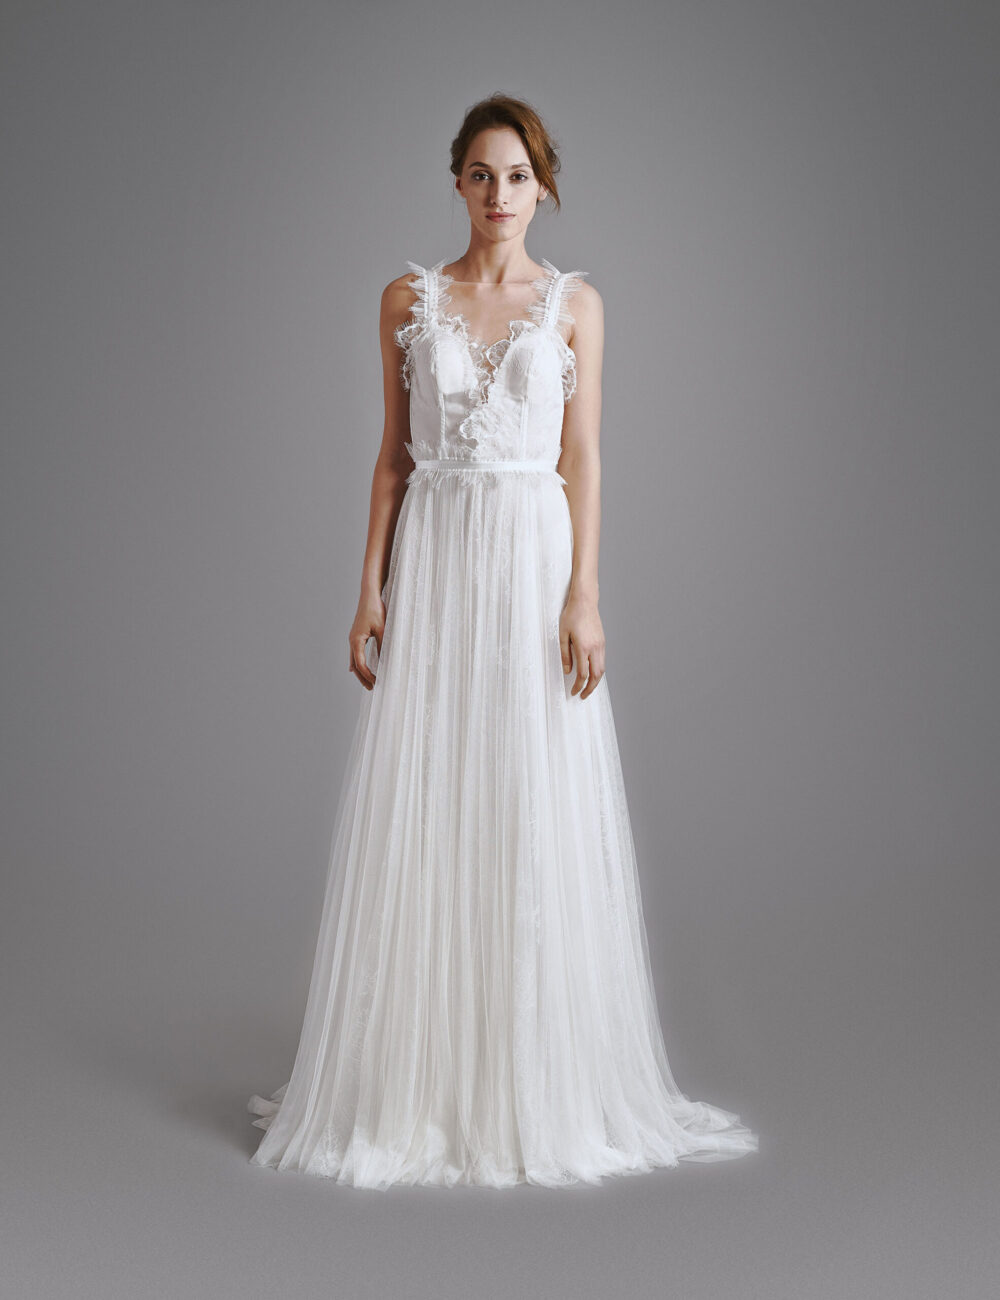 WILLOW Butterfly Bridal Gown - Wedding Dress - BHARB Bridal